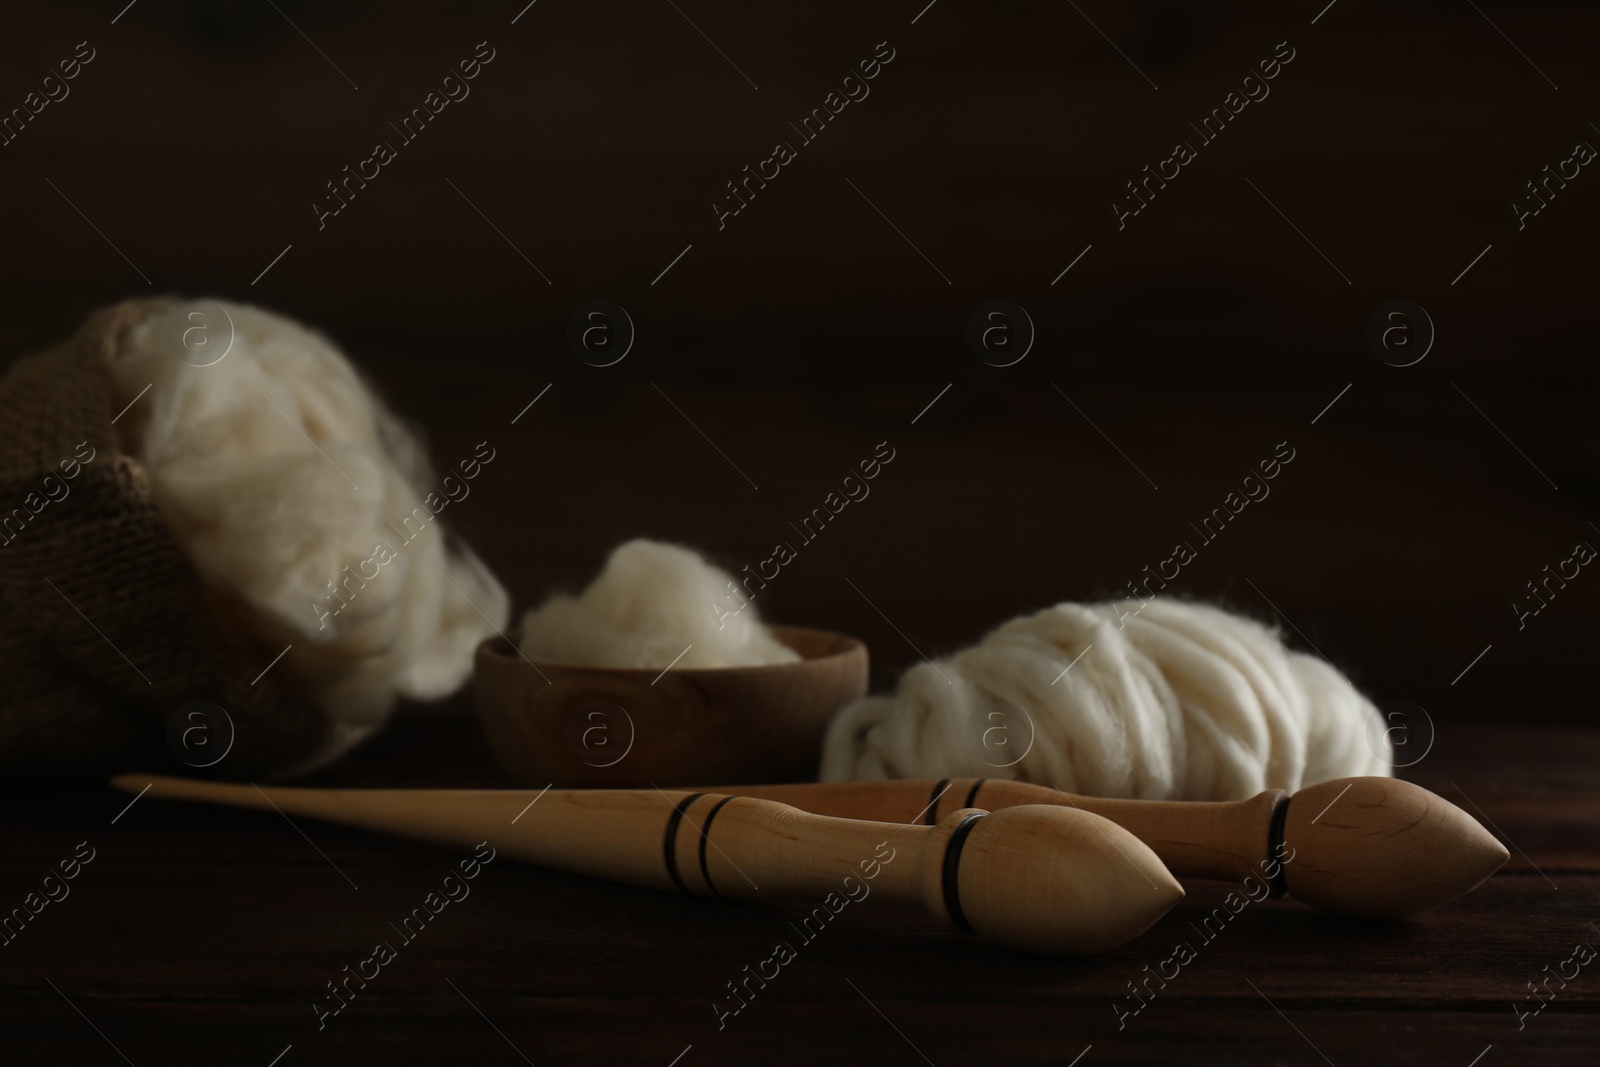 Photo of Soft white wool and spindles on wooden table, closeup